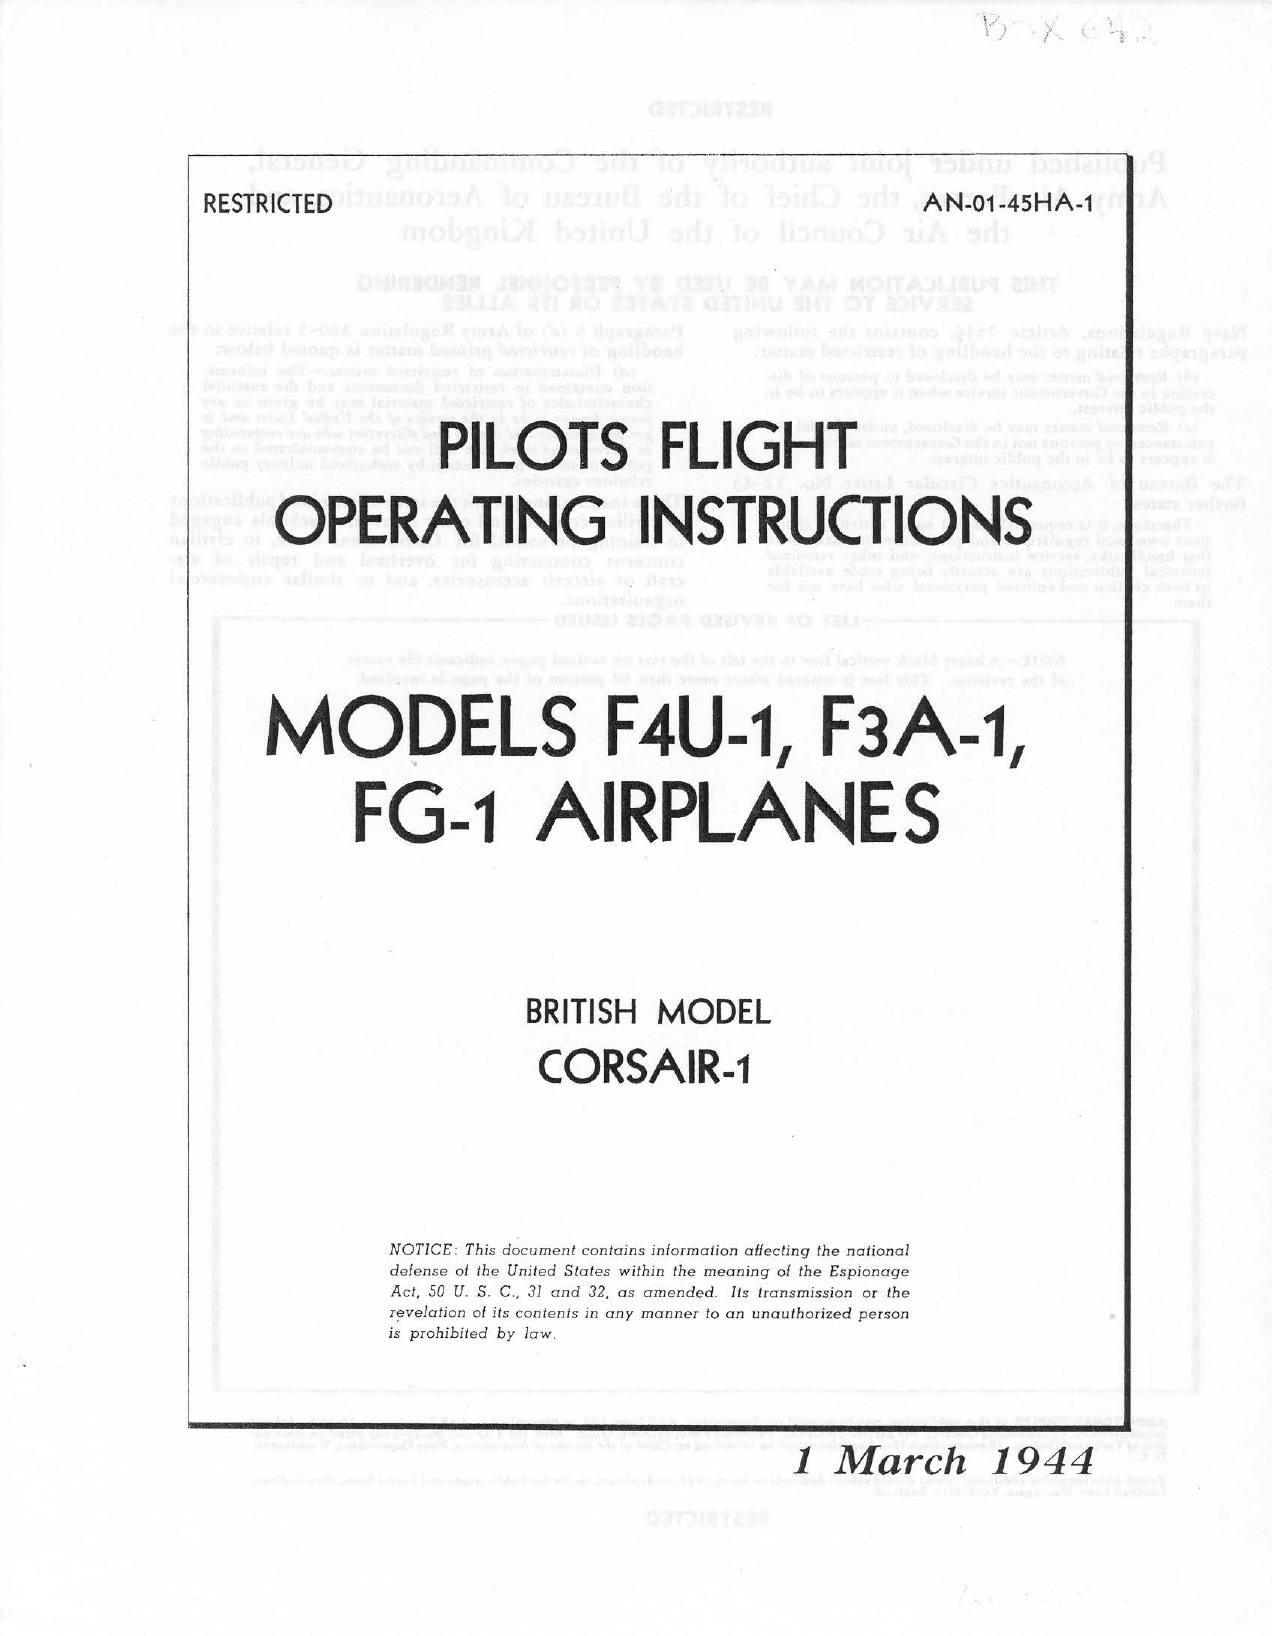 Sample page 1 from AirCorps Library document: Pilots Flight Operating Instructions for Corsair - Models F4U-1, F3A-1 and FG-1